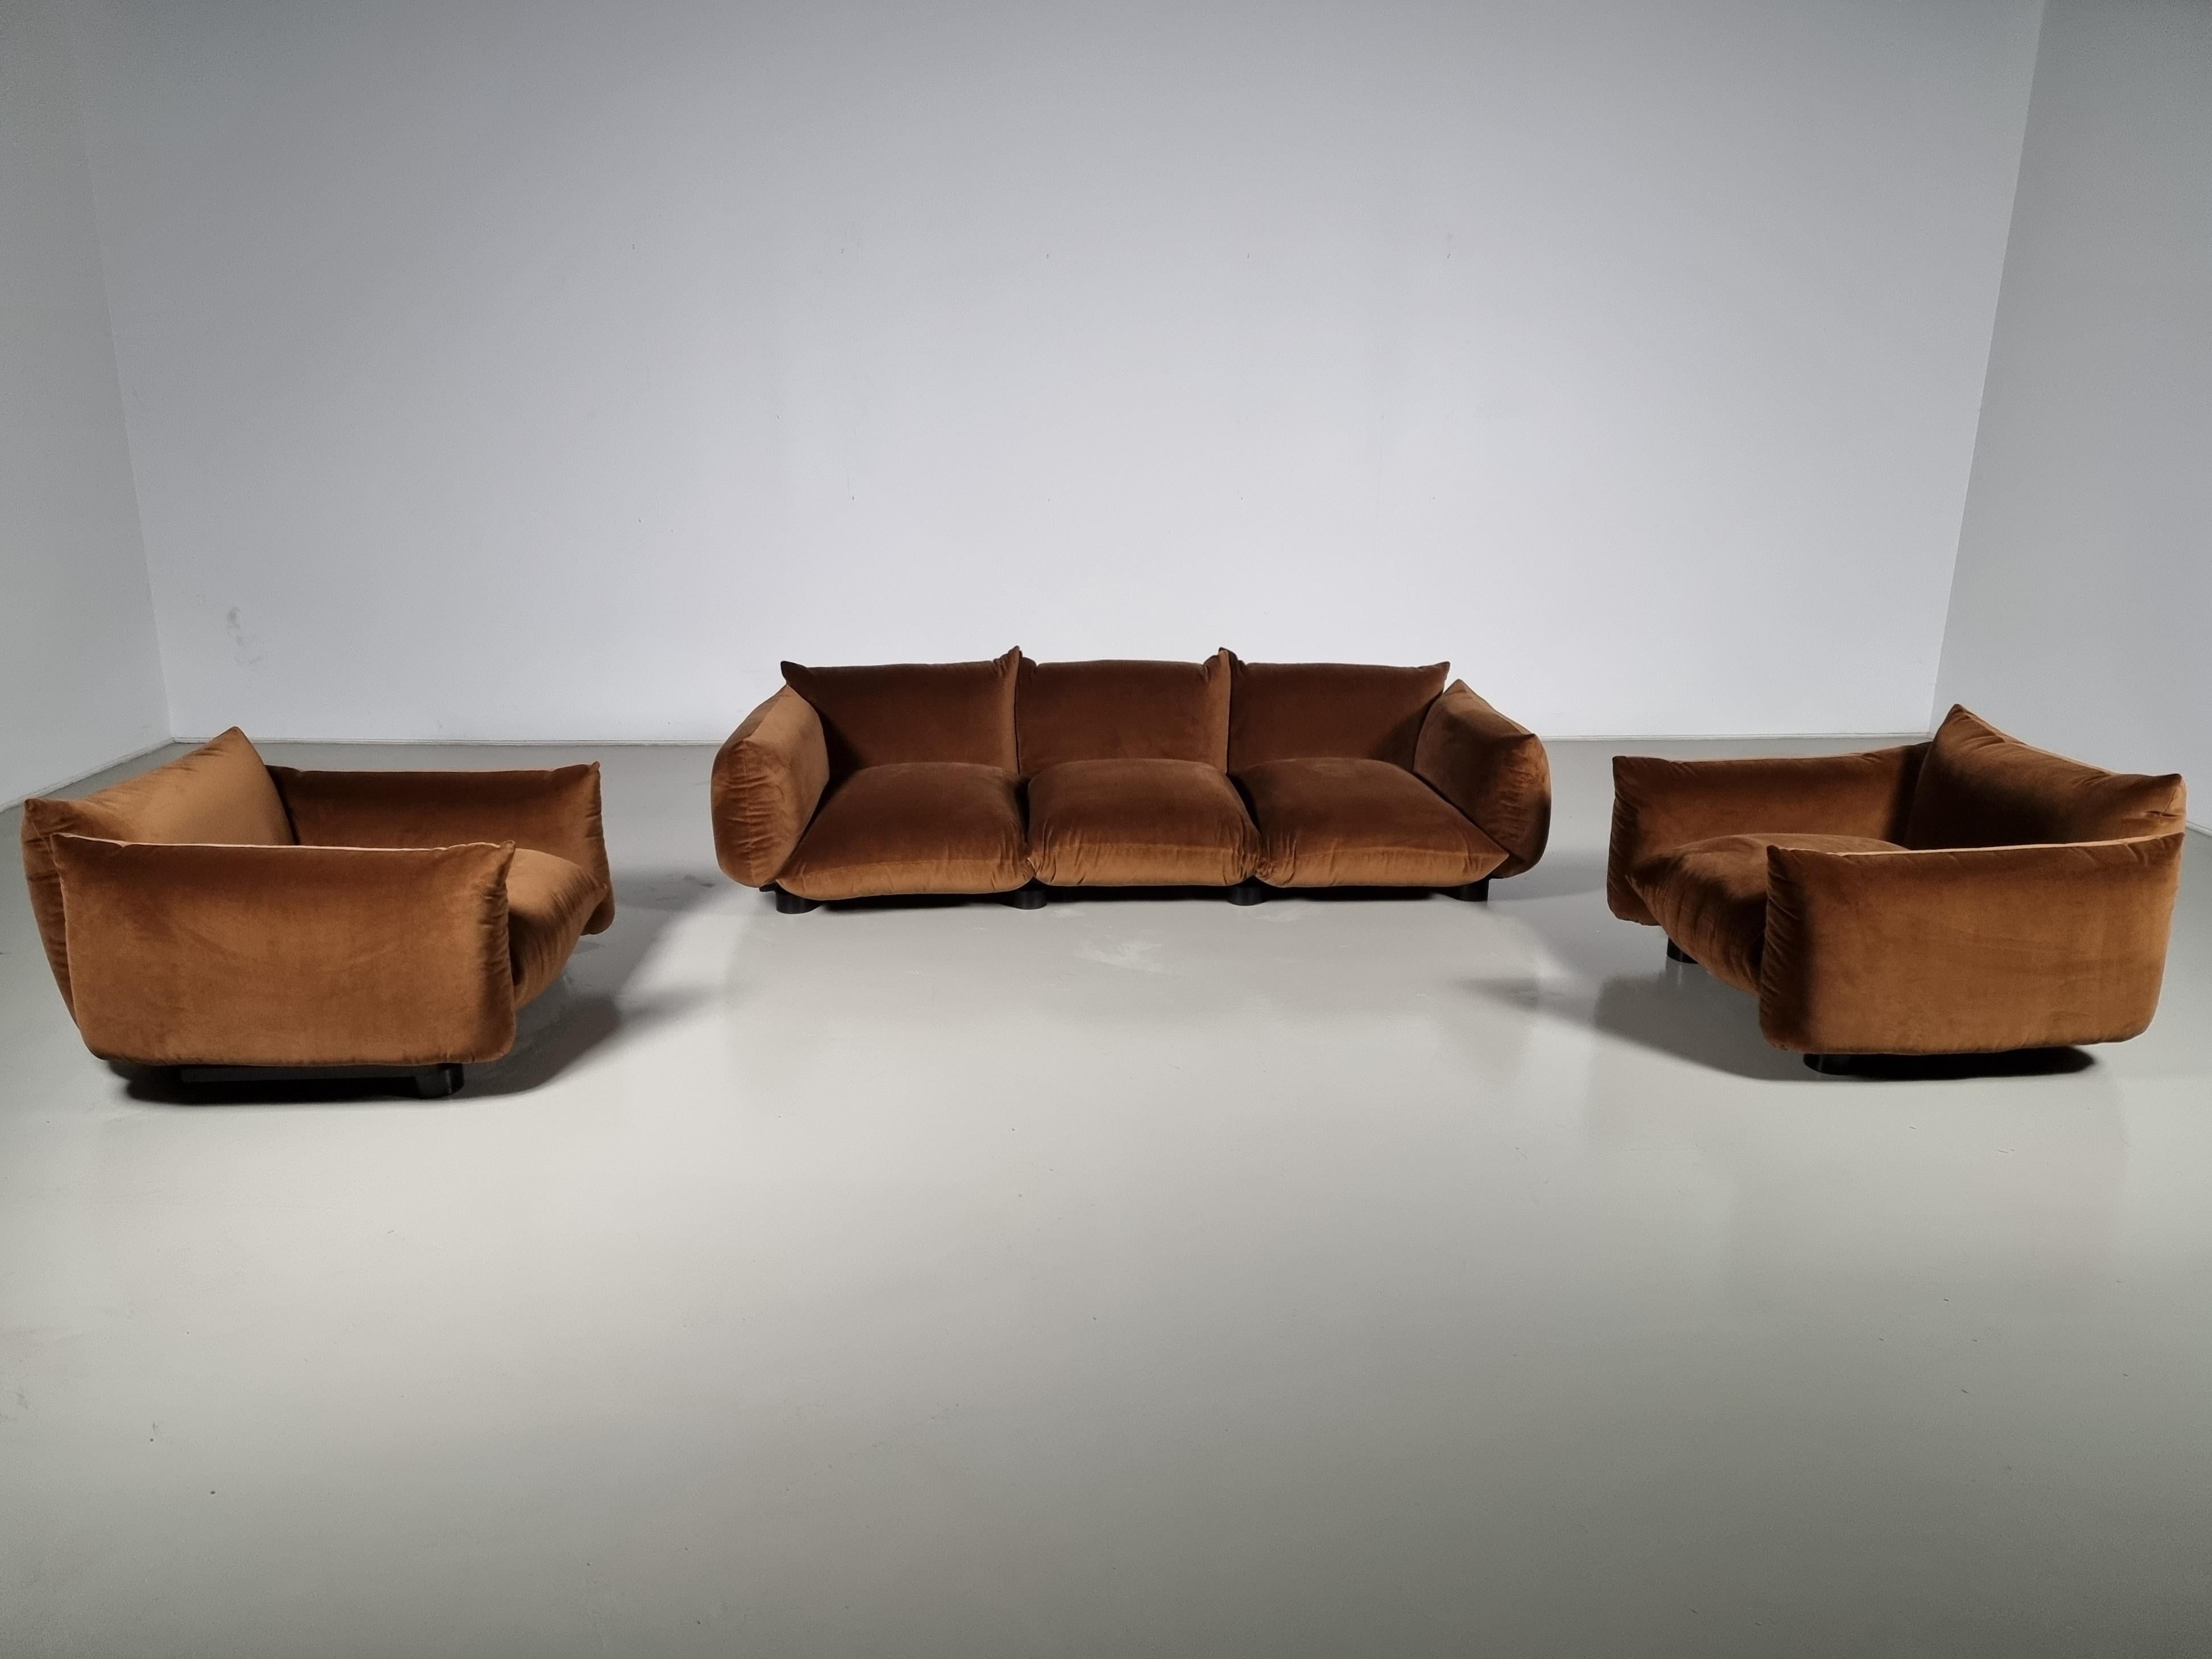 Mario Marenco for Arflex, 'Marenco' sofa, velvet, Italy, 1970

This Marenco set is designed by Mario Marenco for Arflex. This sofa features a system with making the armrest and seats the base portion. There is a metal tubular frame facilitated for